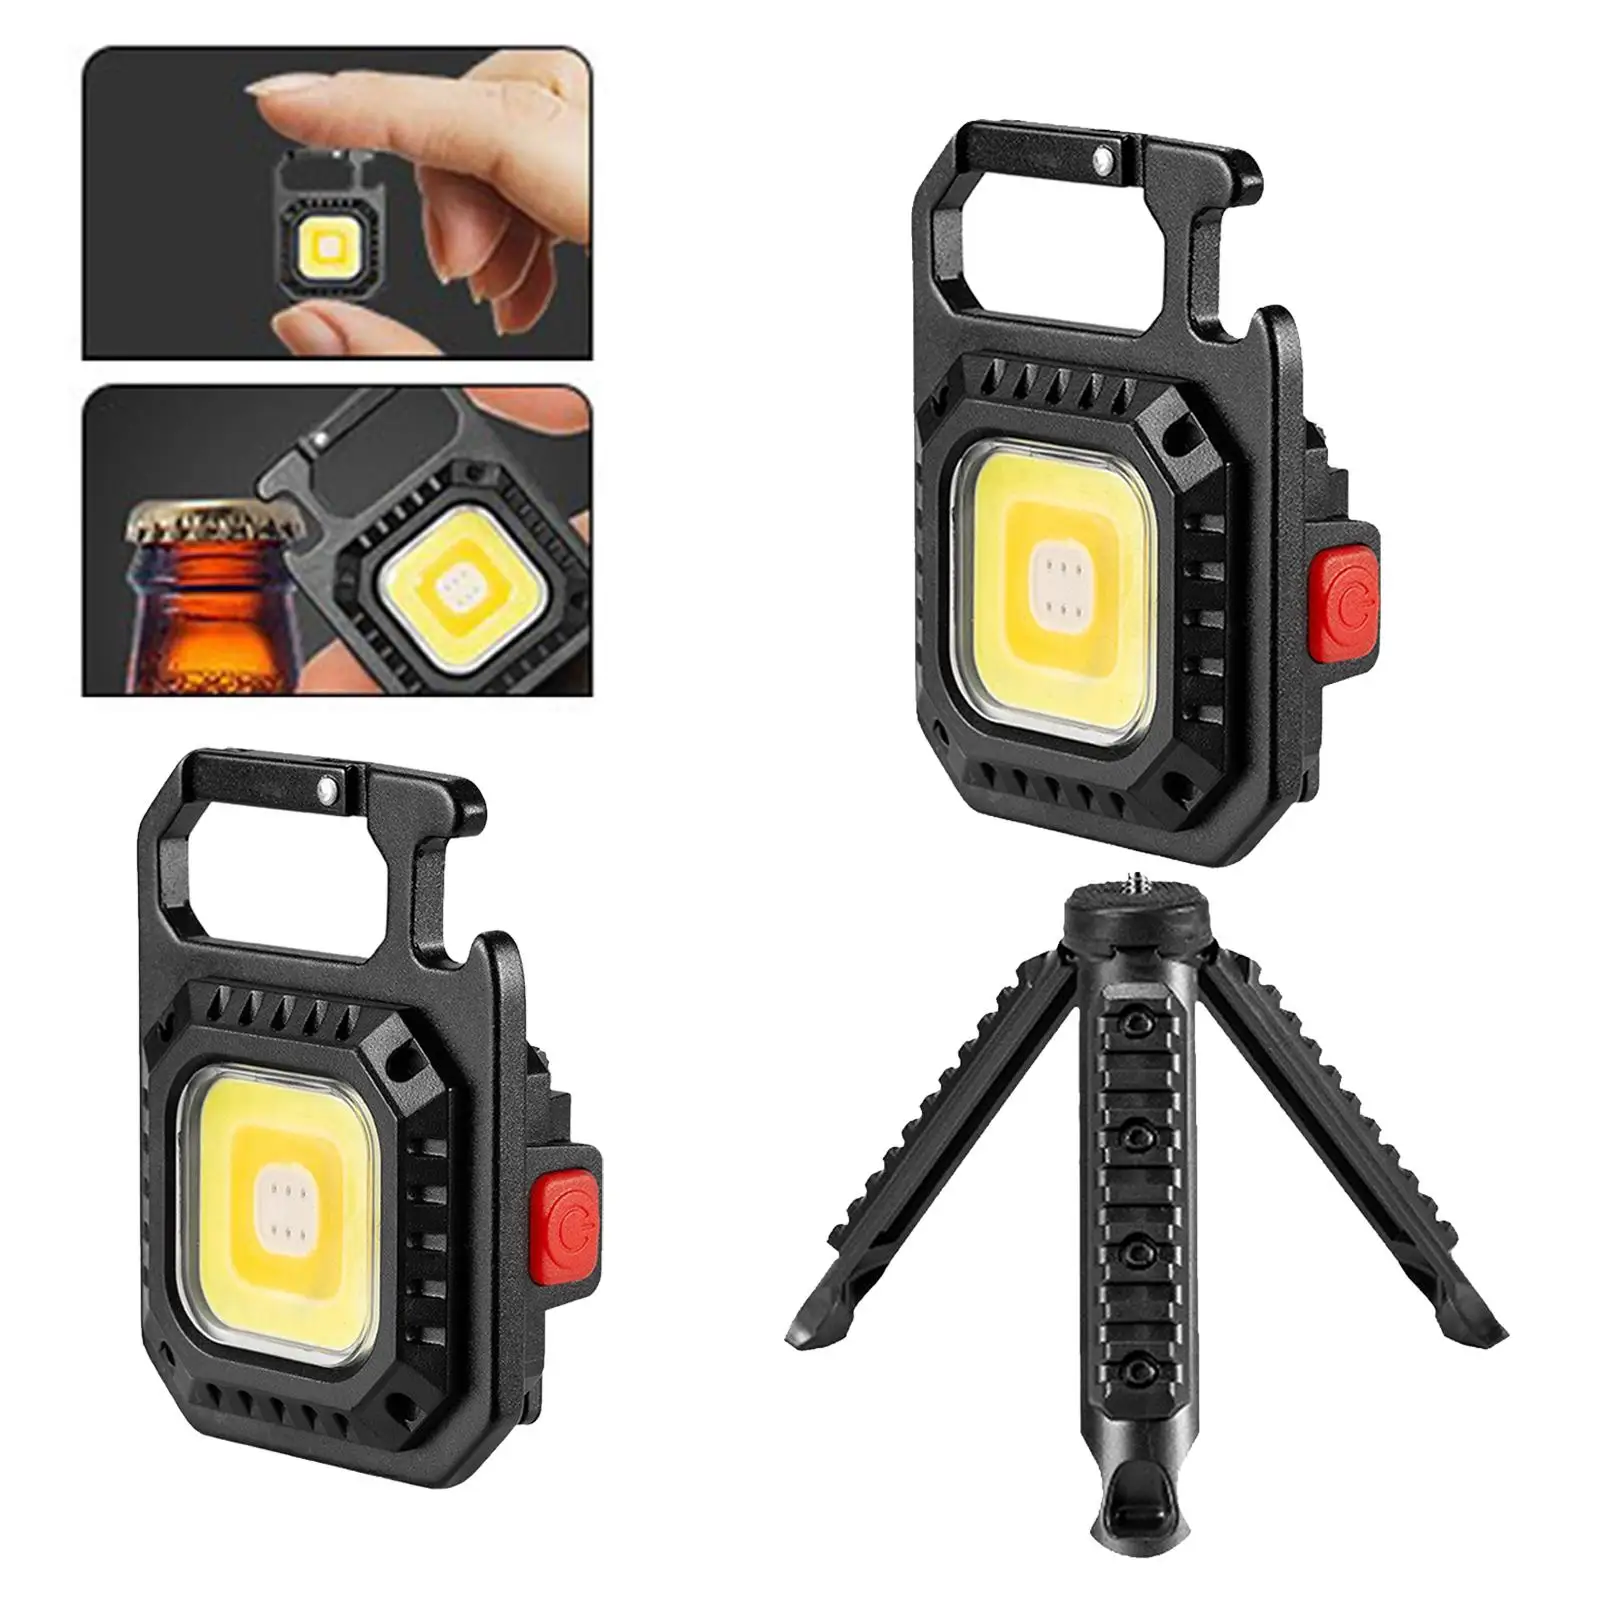 Portable LED Flashlight USB Rechargeable 3 Lighting Modes Adjustable Clips  00 Lumens for repair Outdoor Camping Walking